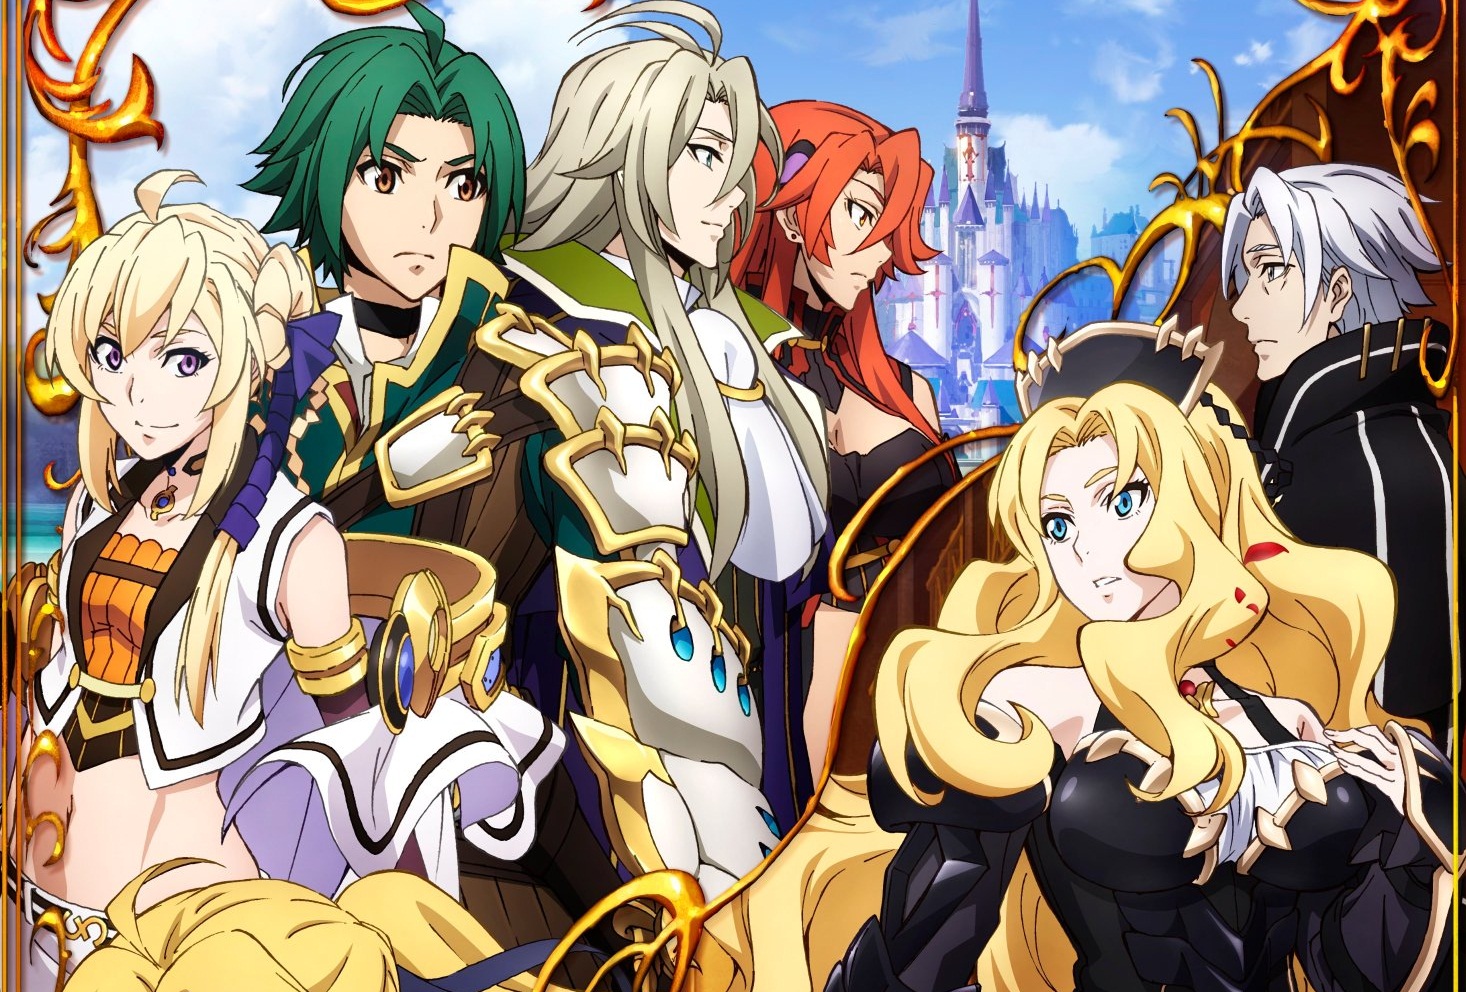 Starry, Record of Grancrest War Wiki